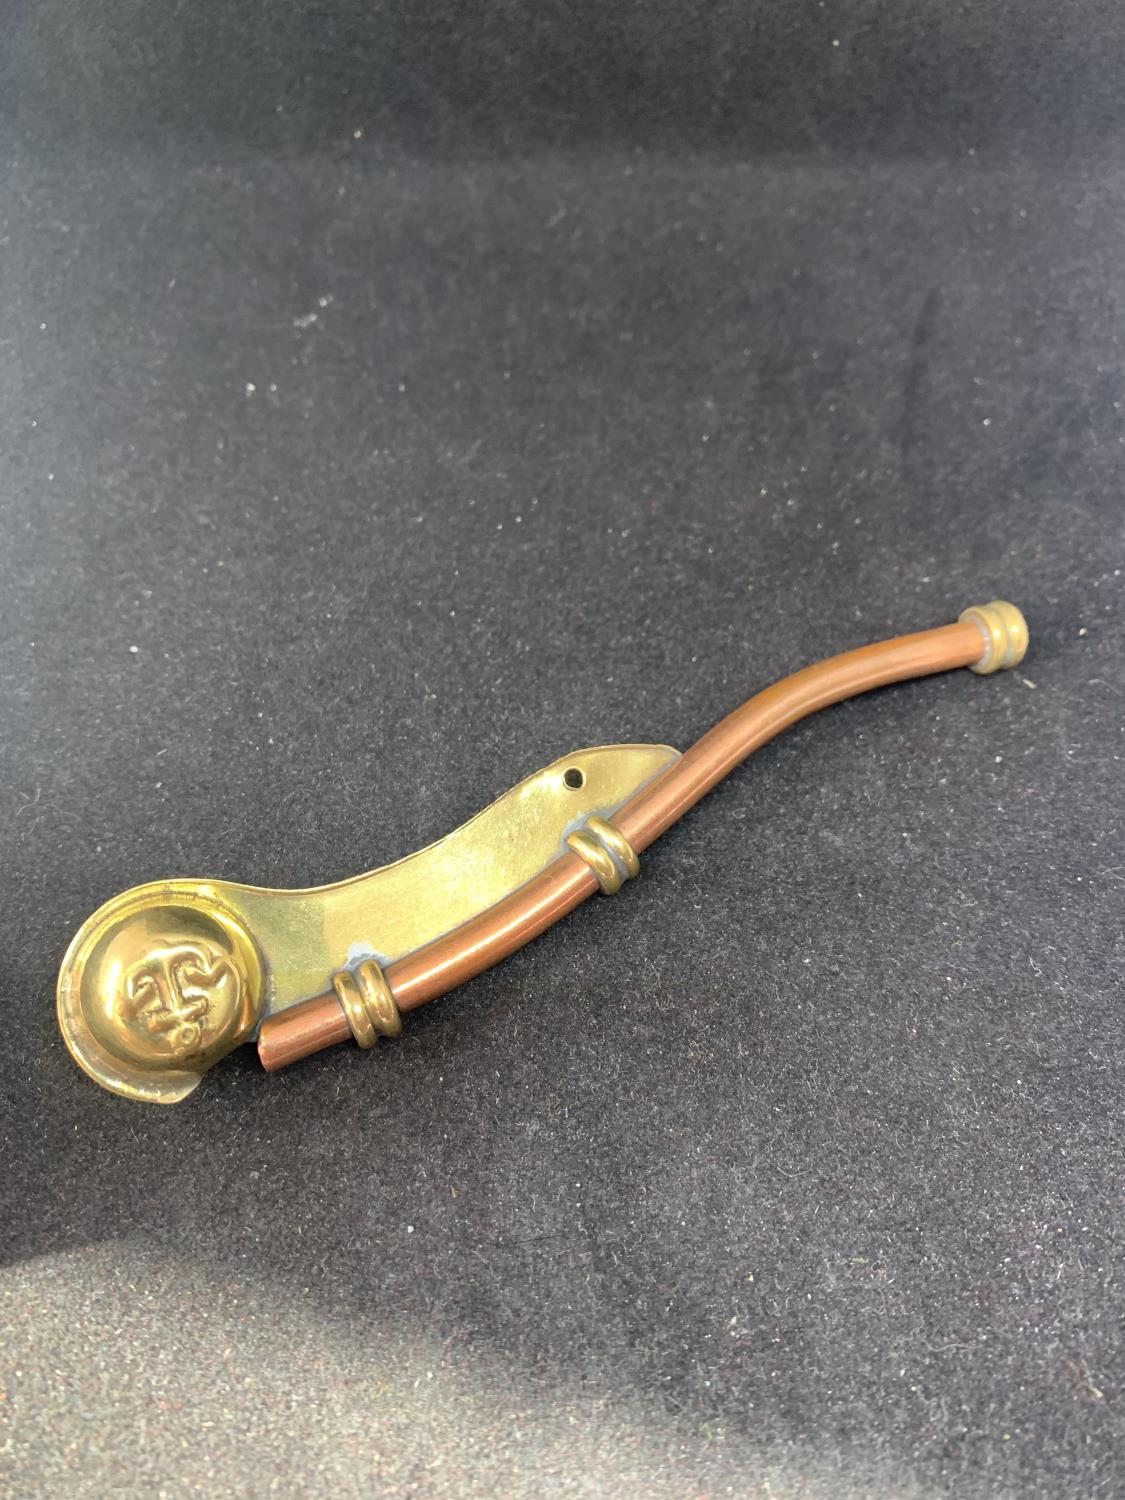 A BRASS AND COPPER BOSONS WHISTLE